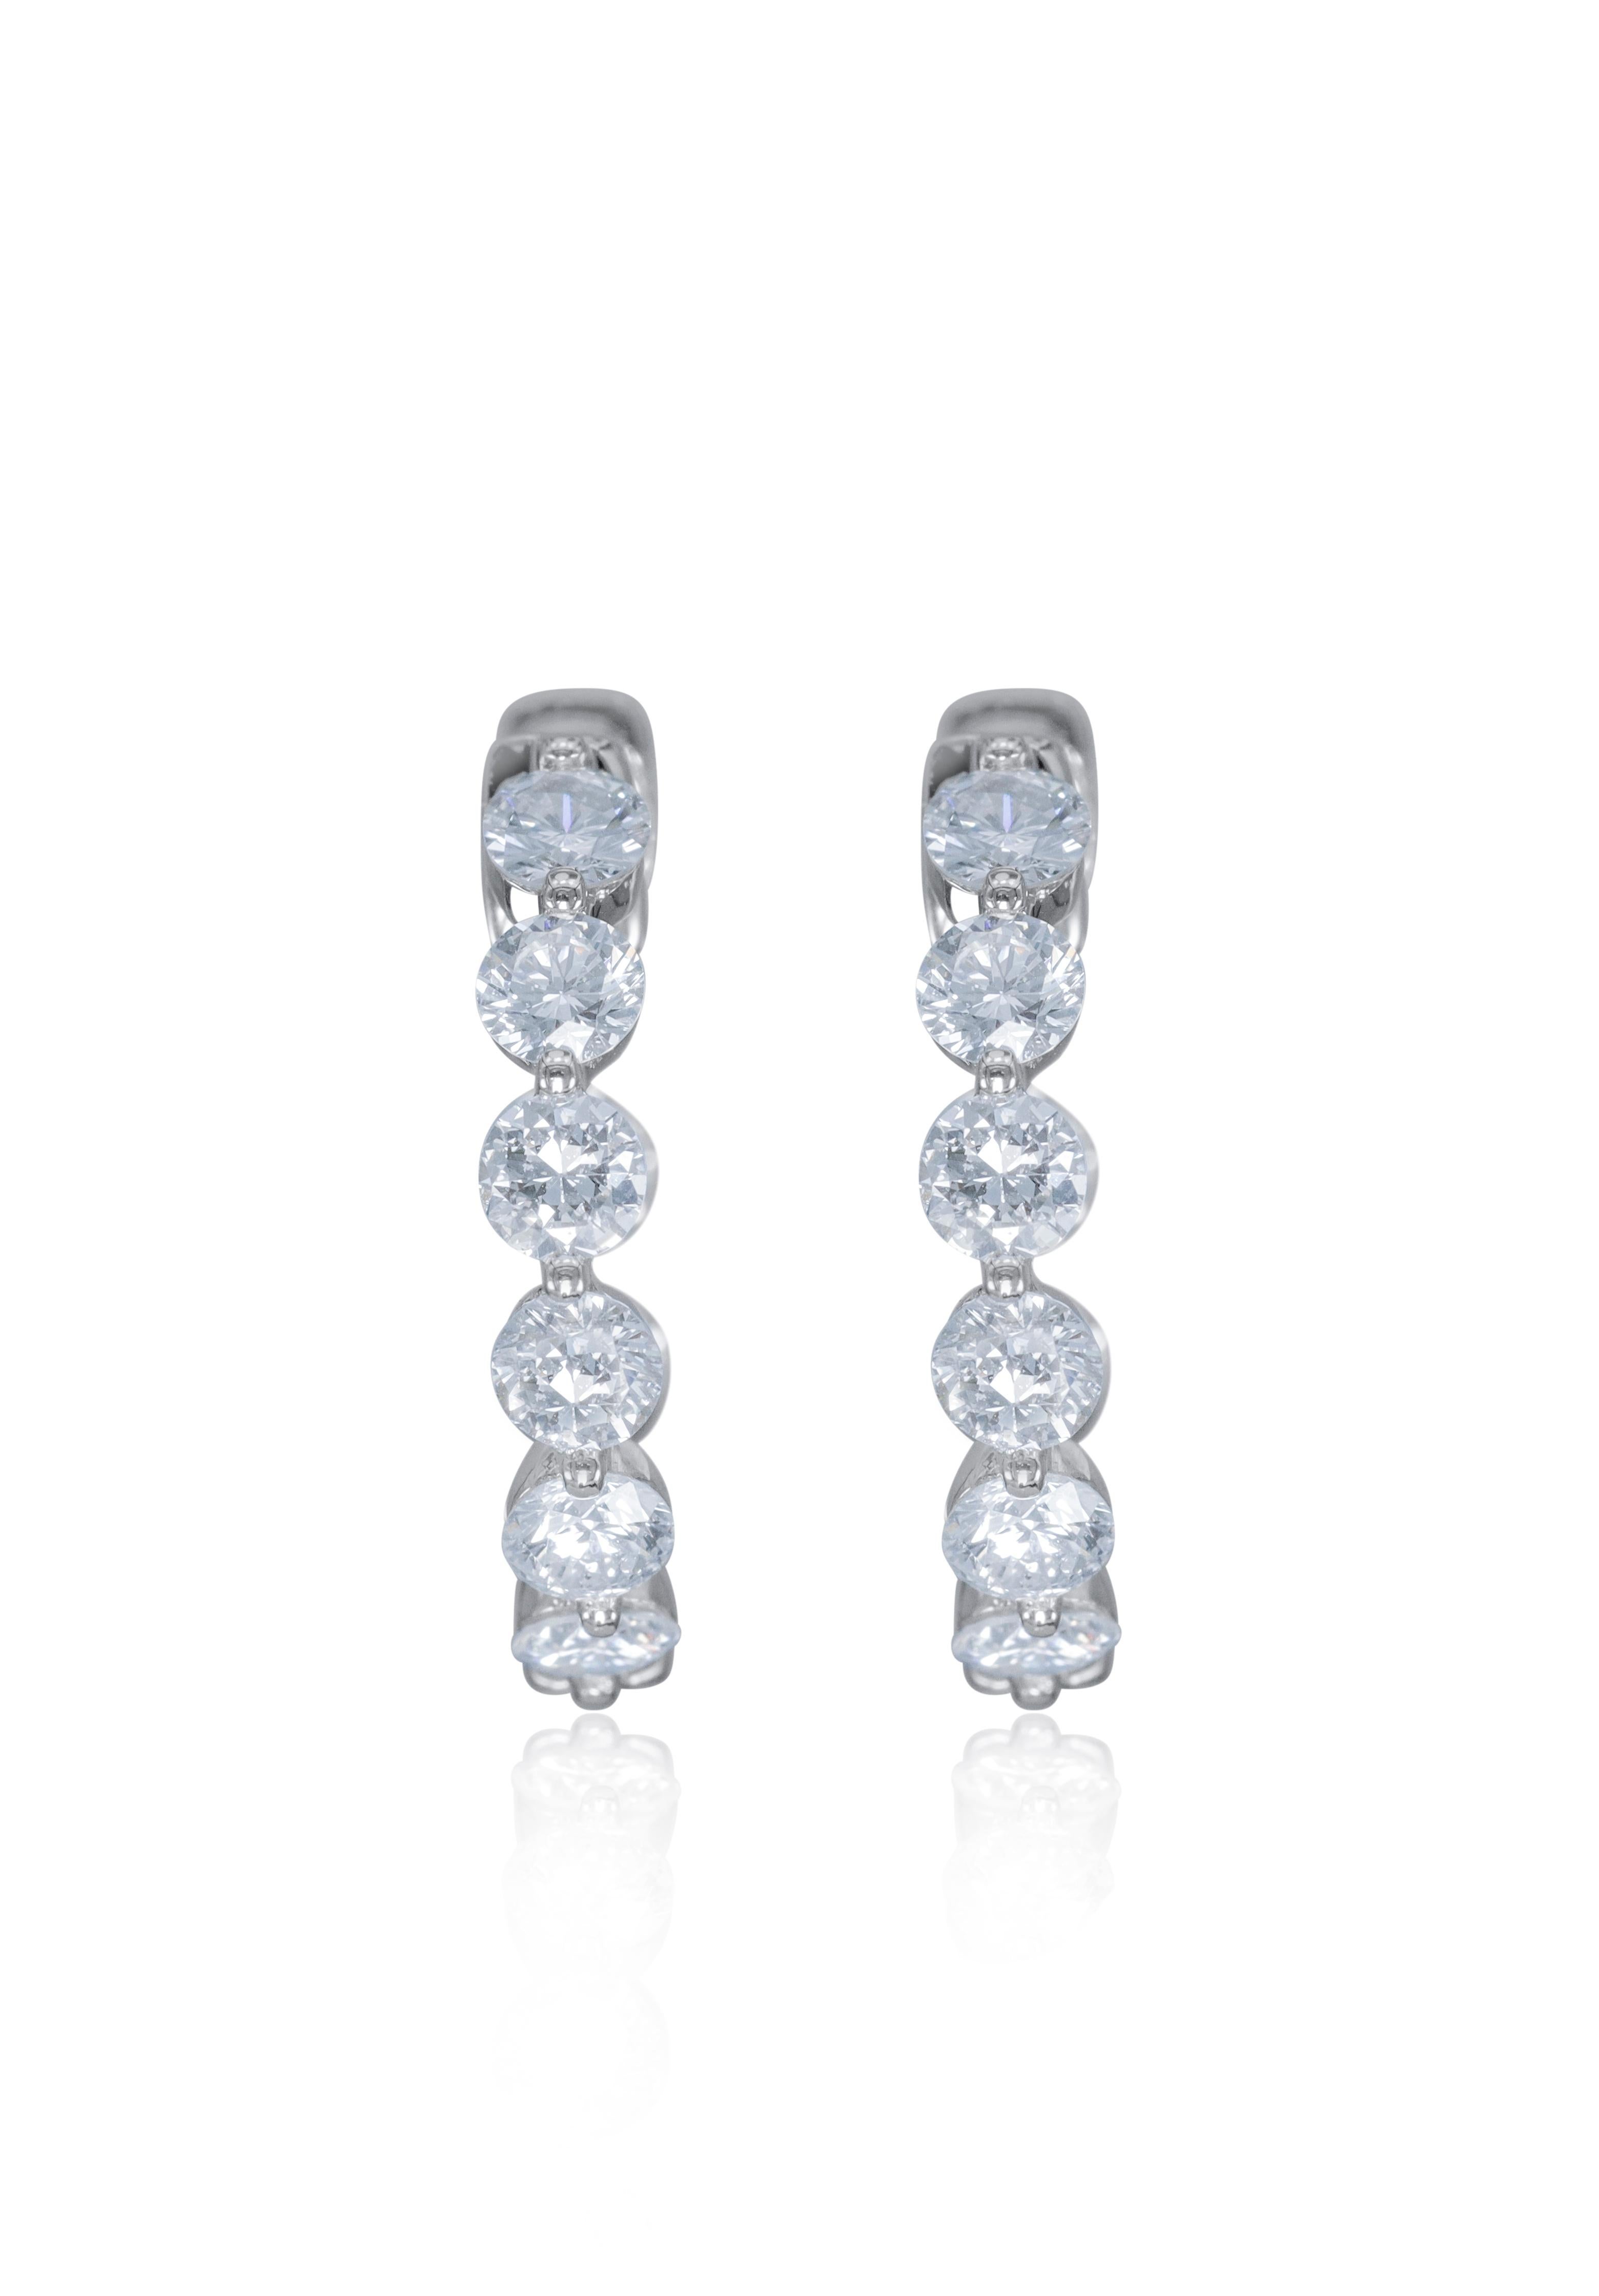 14K White Gold Diamond Earrings featuring 1.99 Carats of Diamonds

Underline your look with this sharp 14K White gold shape Diamond Earrings. High quality Diamonds. This Earrings will underline your exquisite look for any occasion.

. is a leading